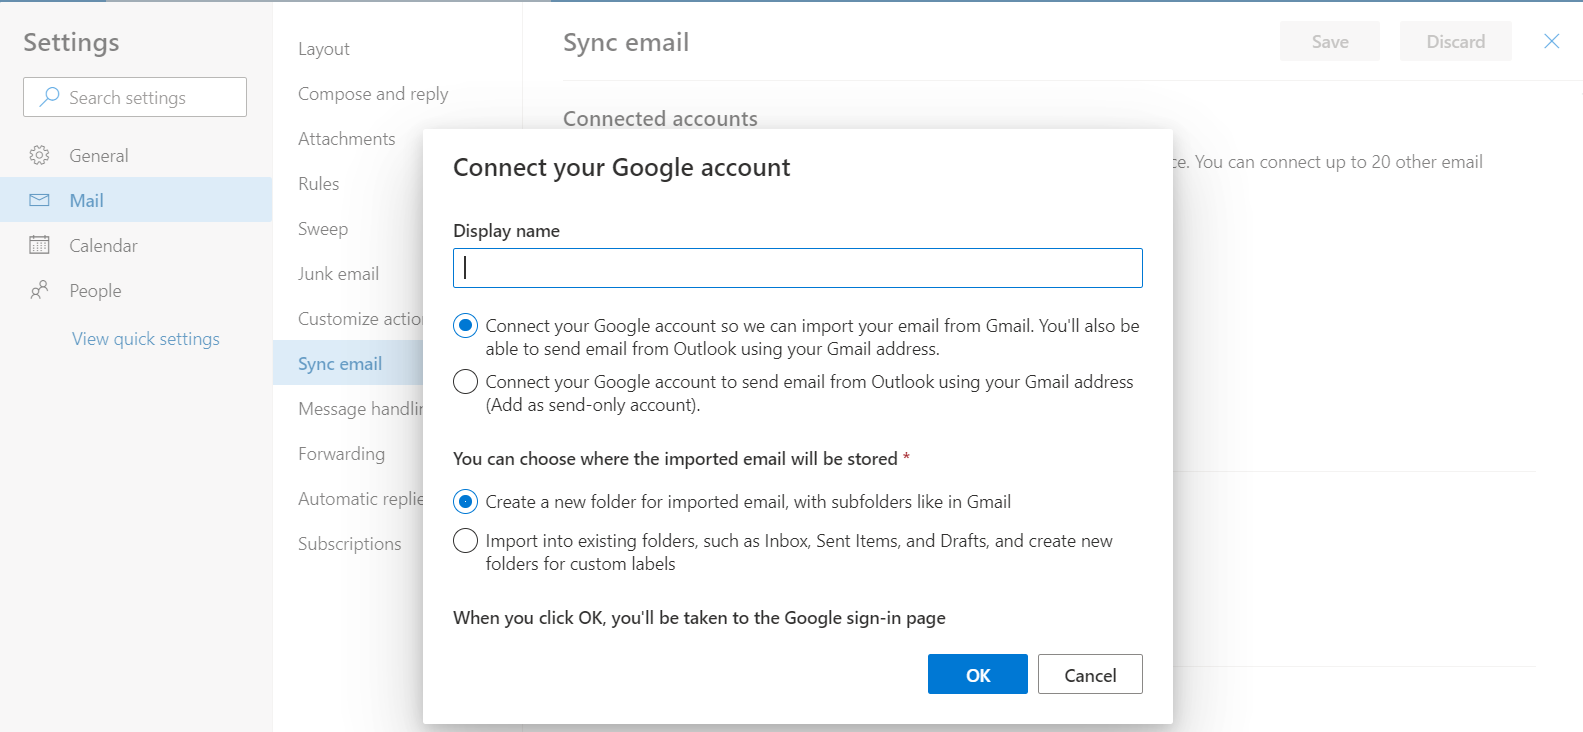 open Yahoo emails in outlook.com